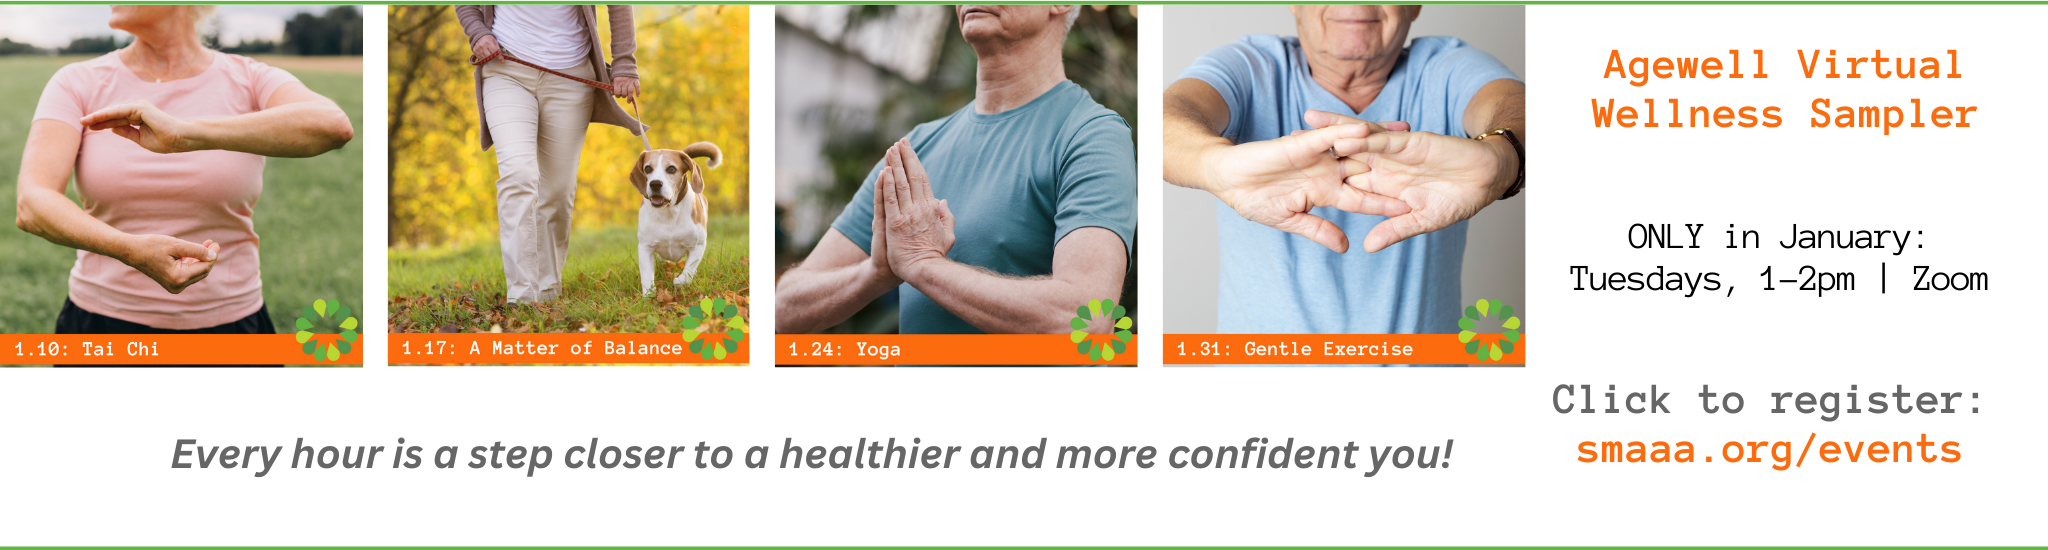 Pictures of people doing Tai Chi, walking, Yoga, and stretches and the words Agewell Virtual Wellness Sampler 